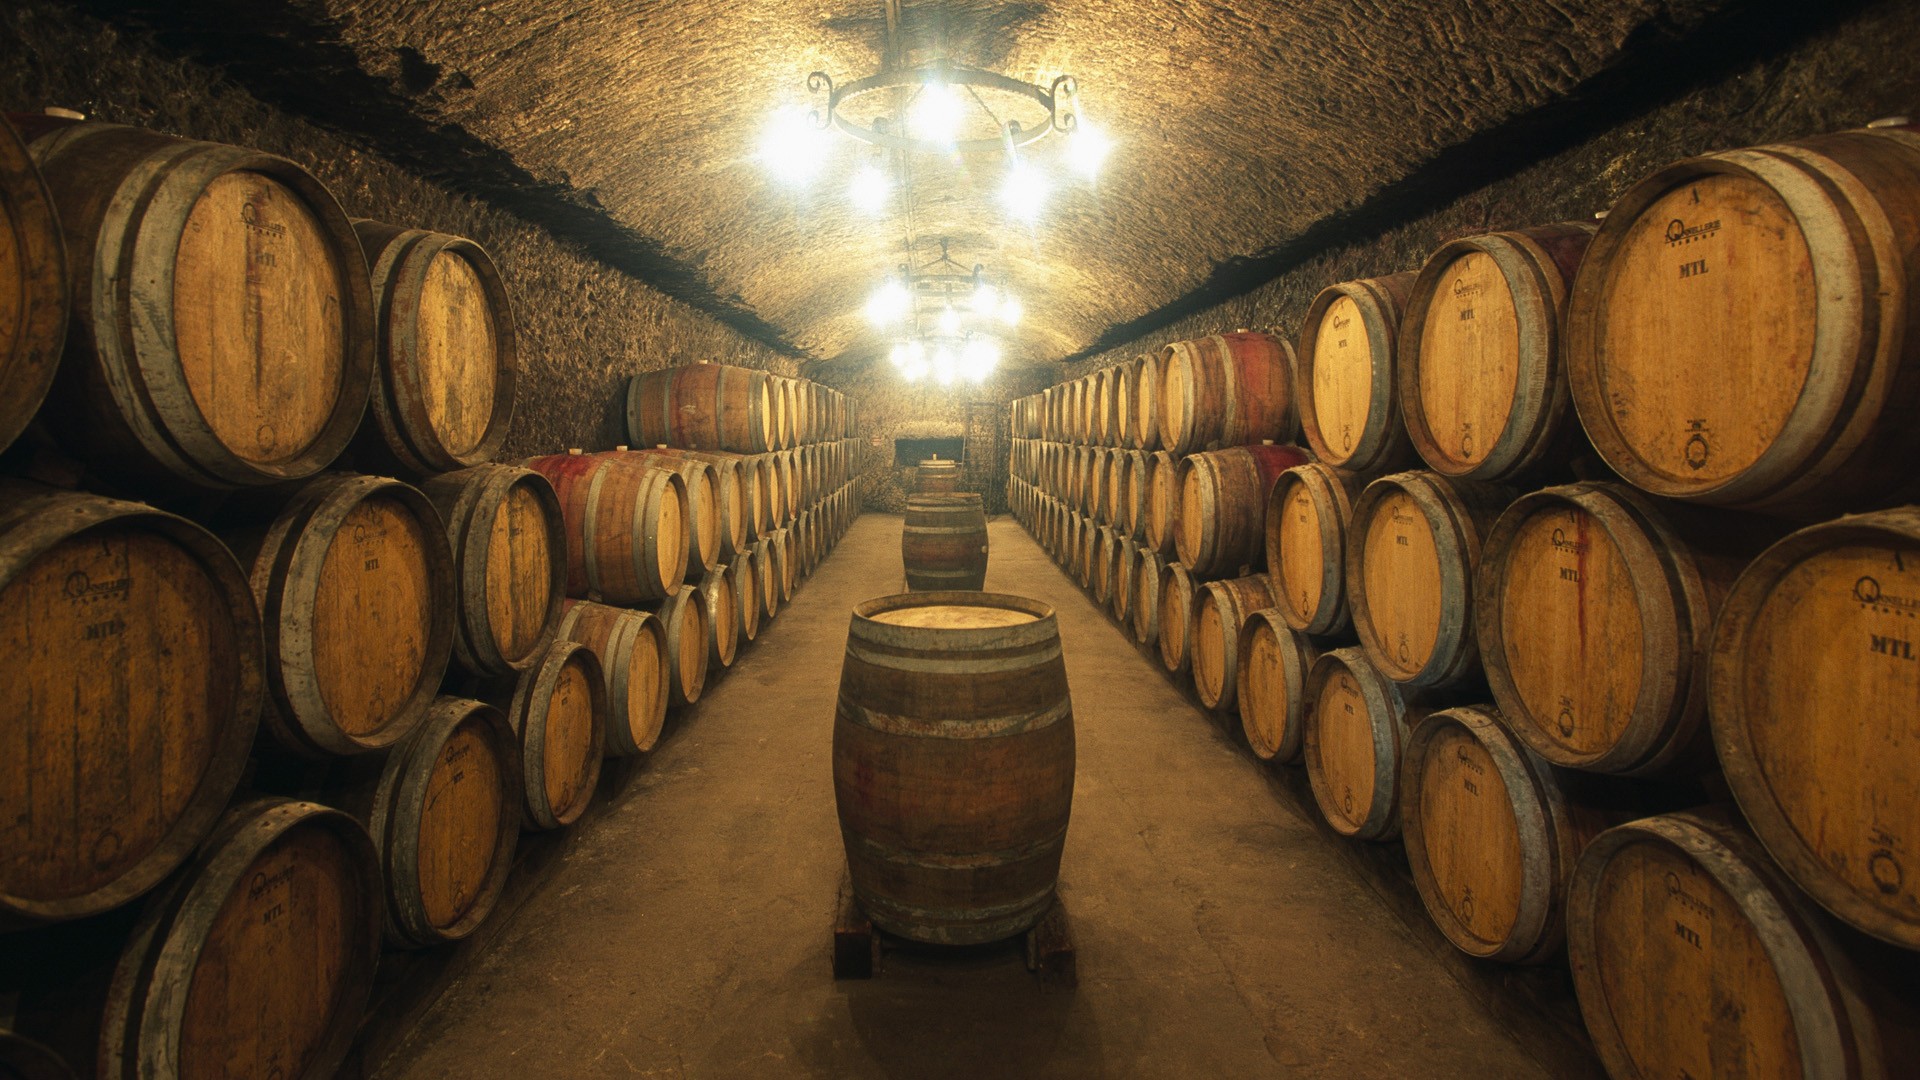 The wine warehouse wallpapers and images   wallpapers pictures 1920x1080